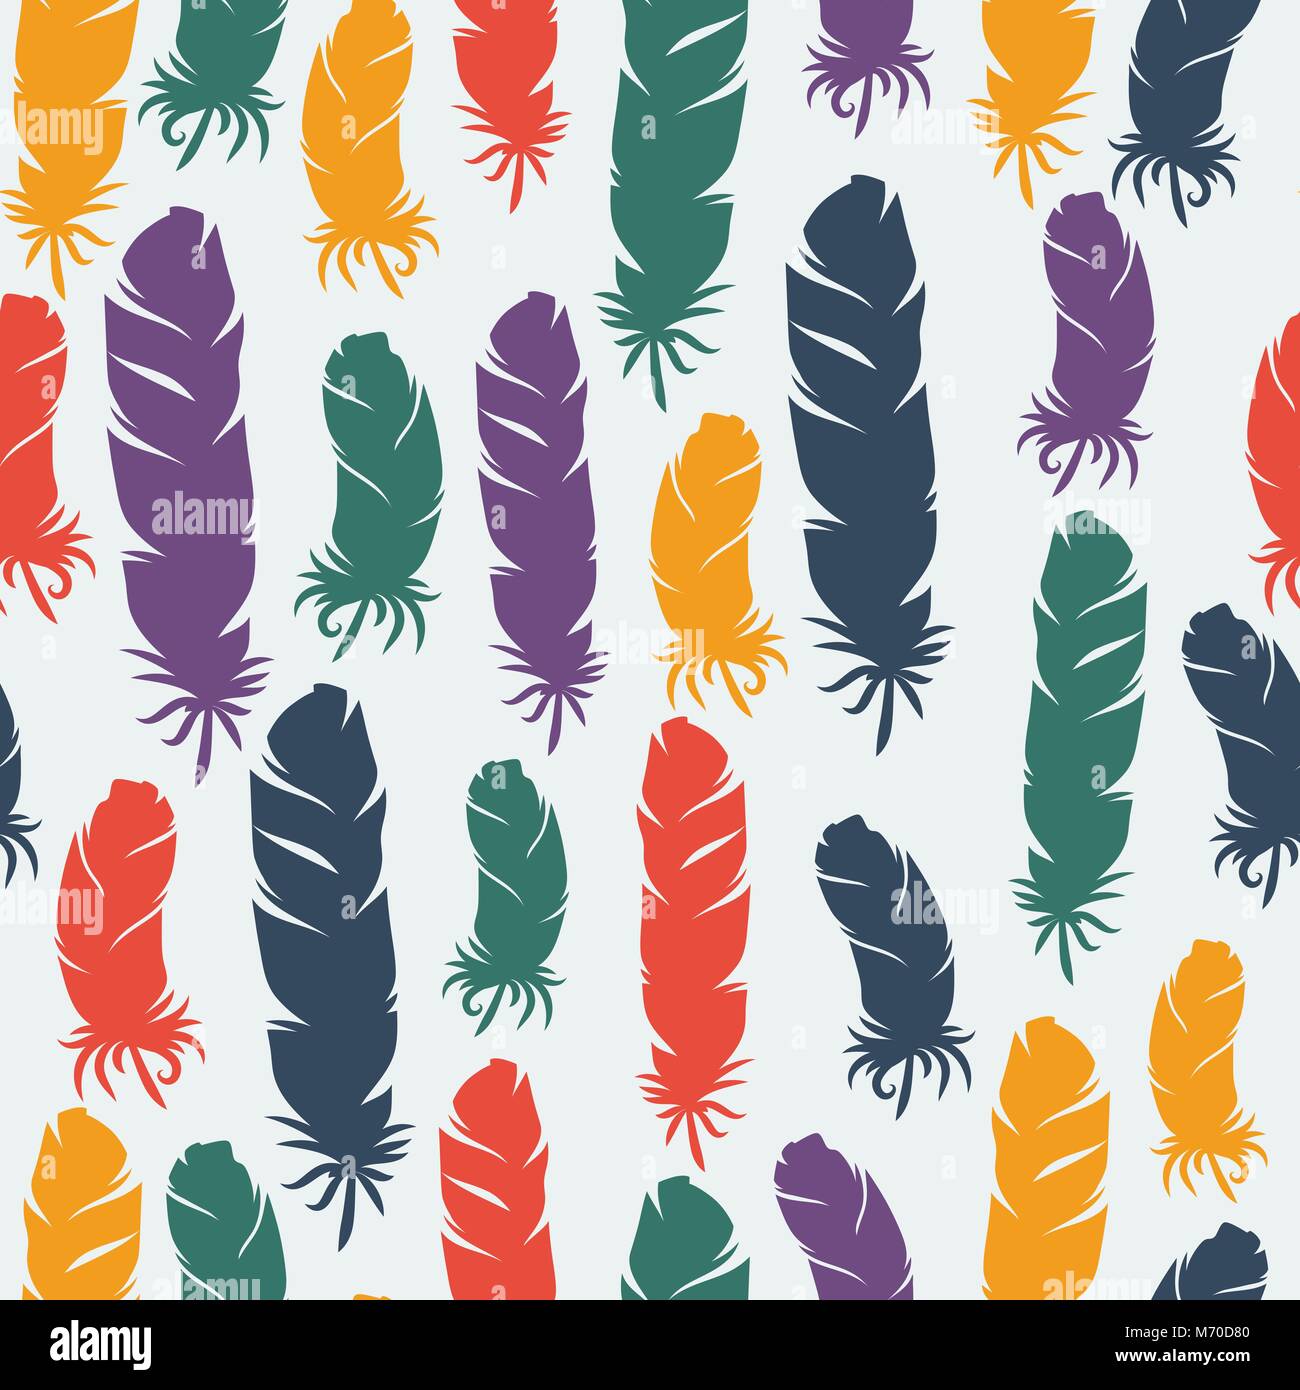 Seamless  pattern with hand drawn bird feathers Stock Vector